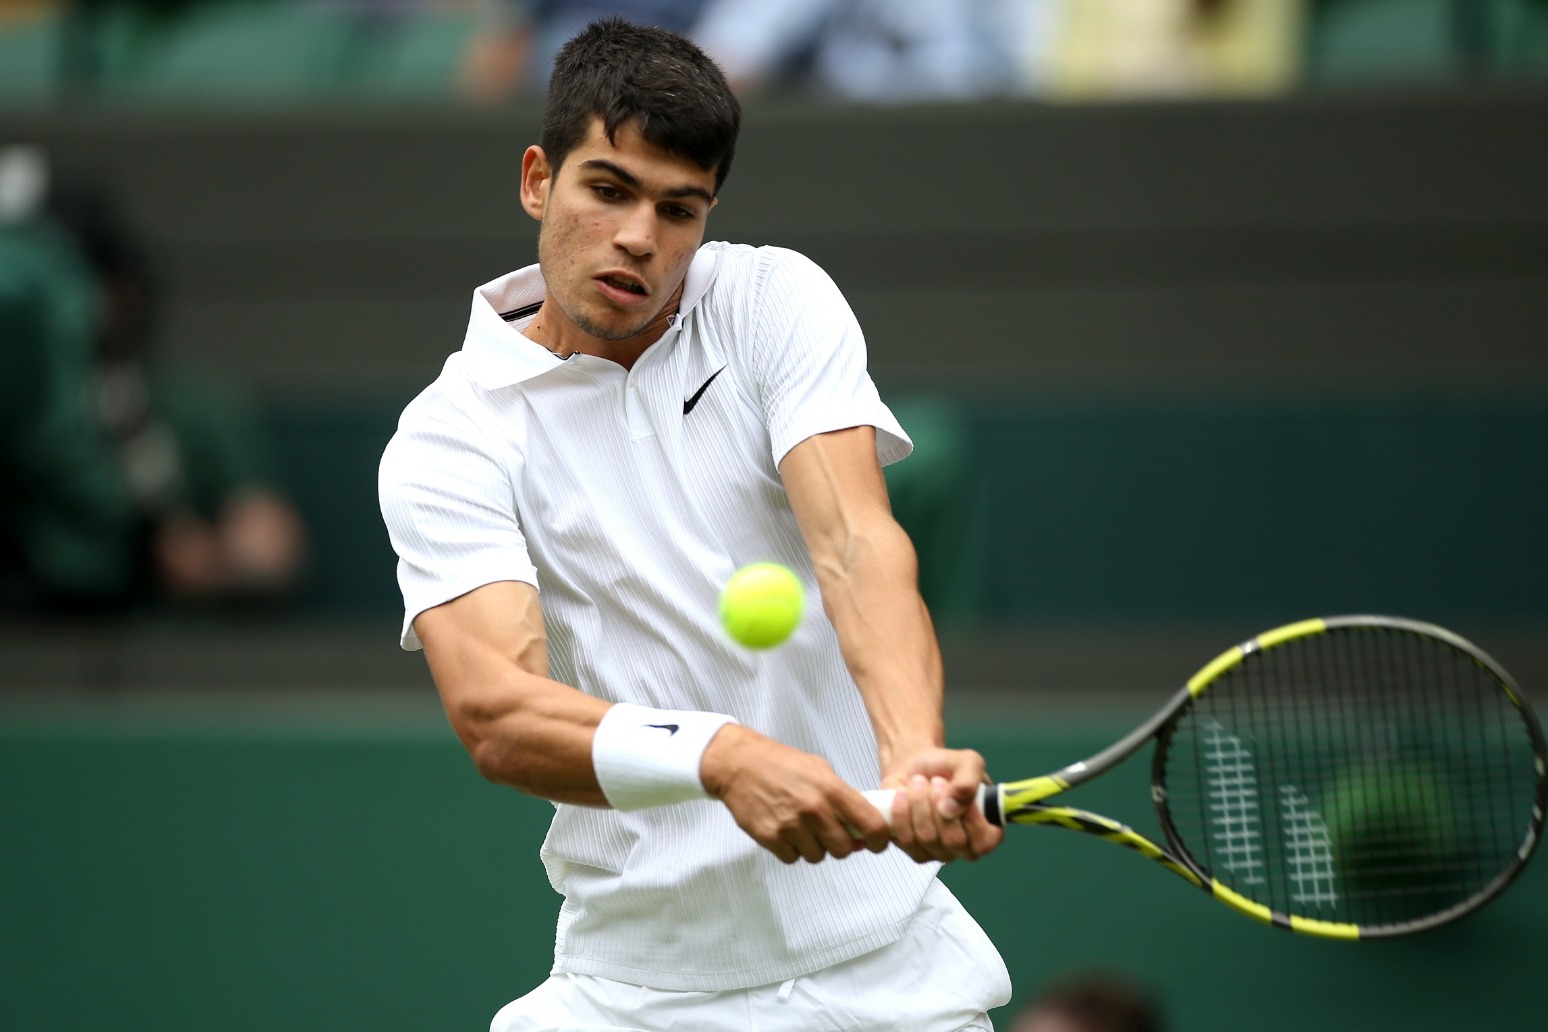 Carlos Alcaraz believes it is too soon for him to challenge for Wimbledon title 